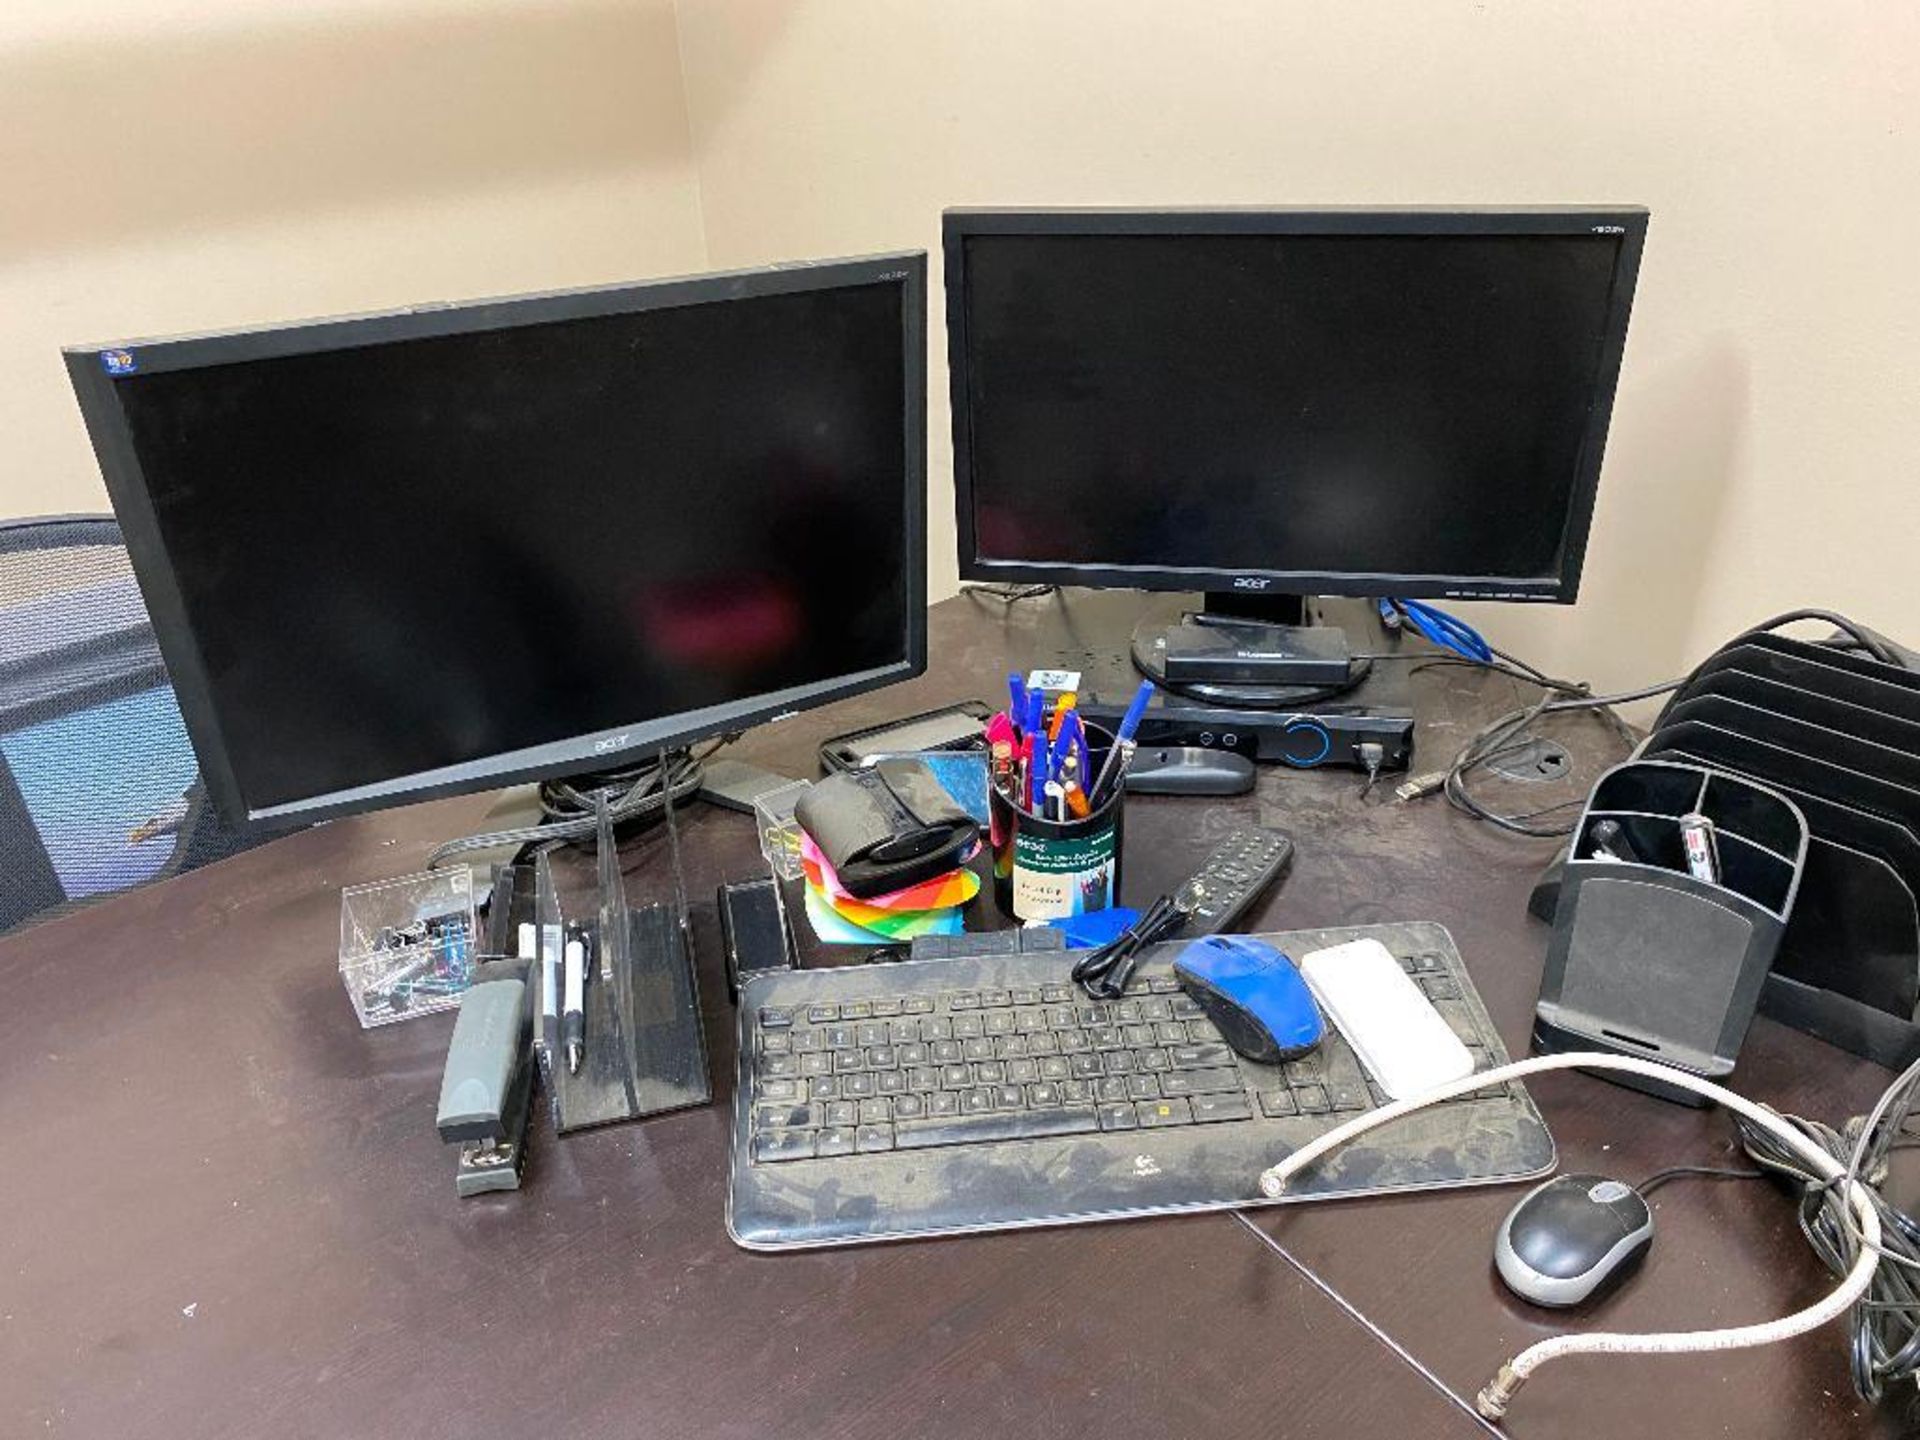 Lot of (2) Monitors, Lorex Security System, Routers, Phone, Printer, etc. - Image 2 of 3